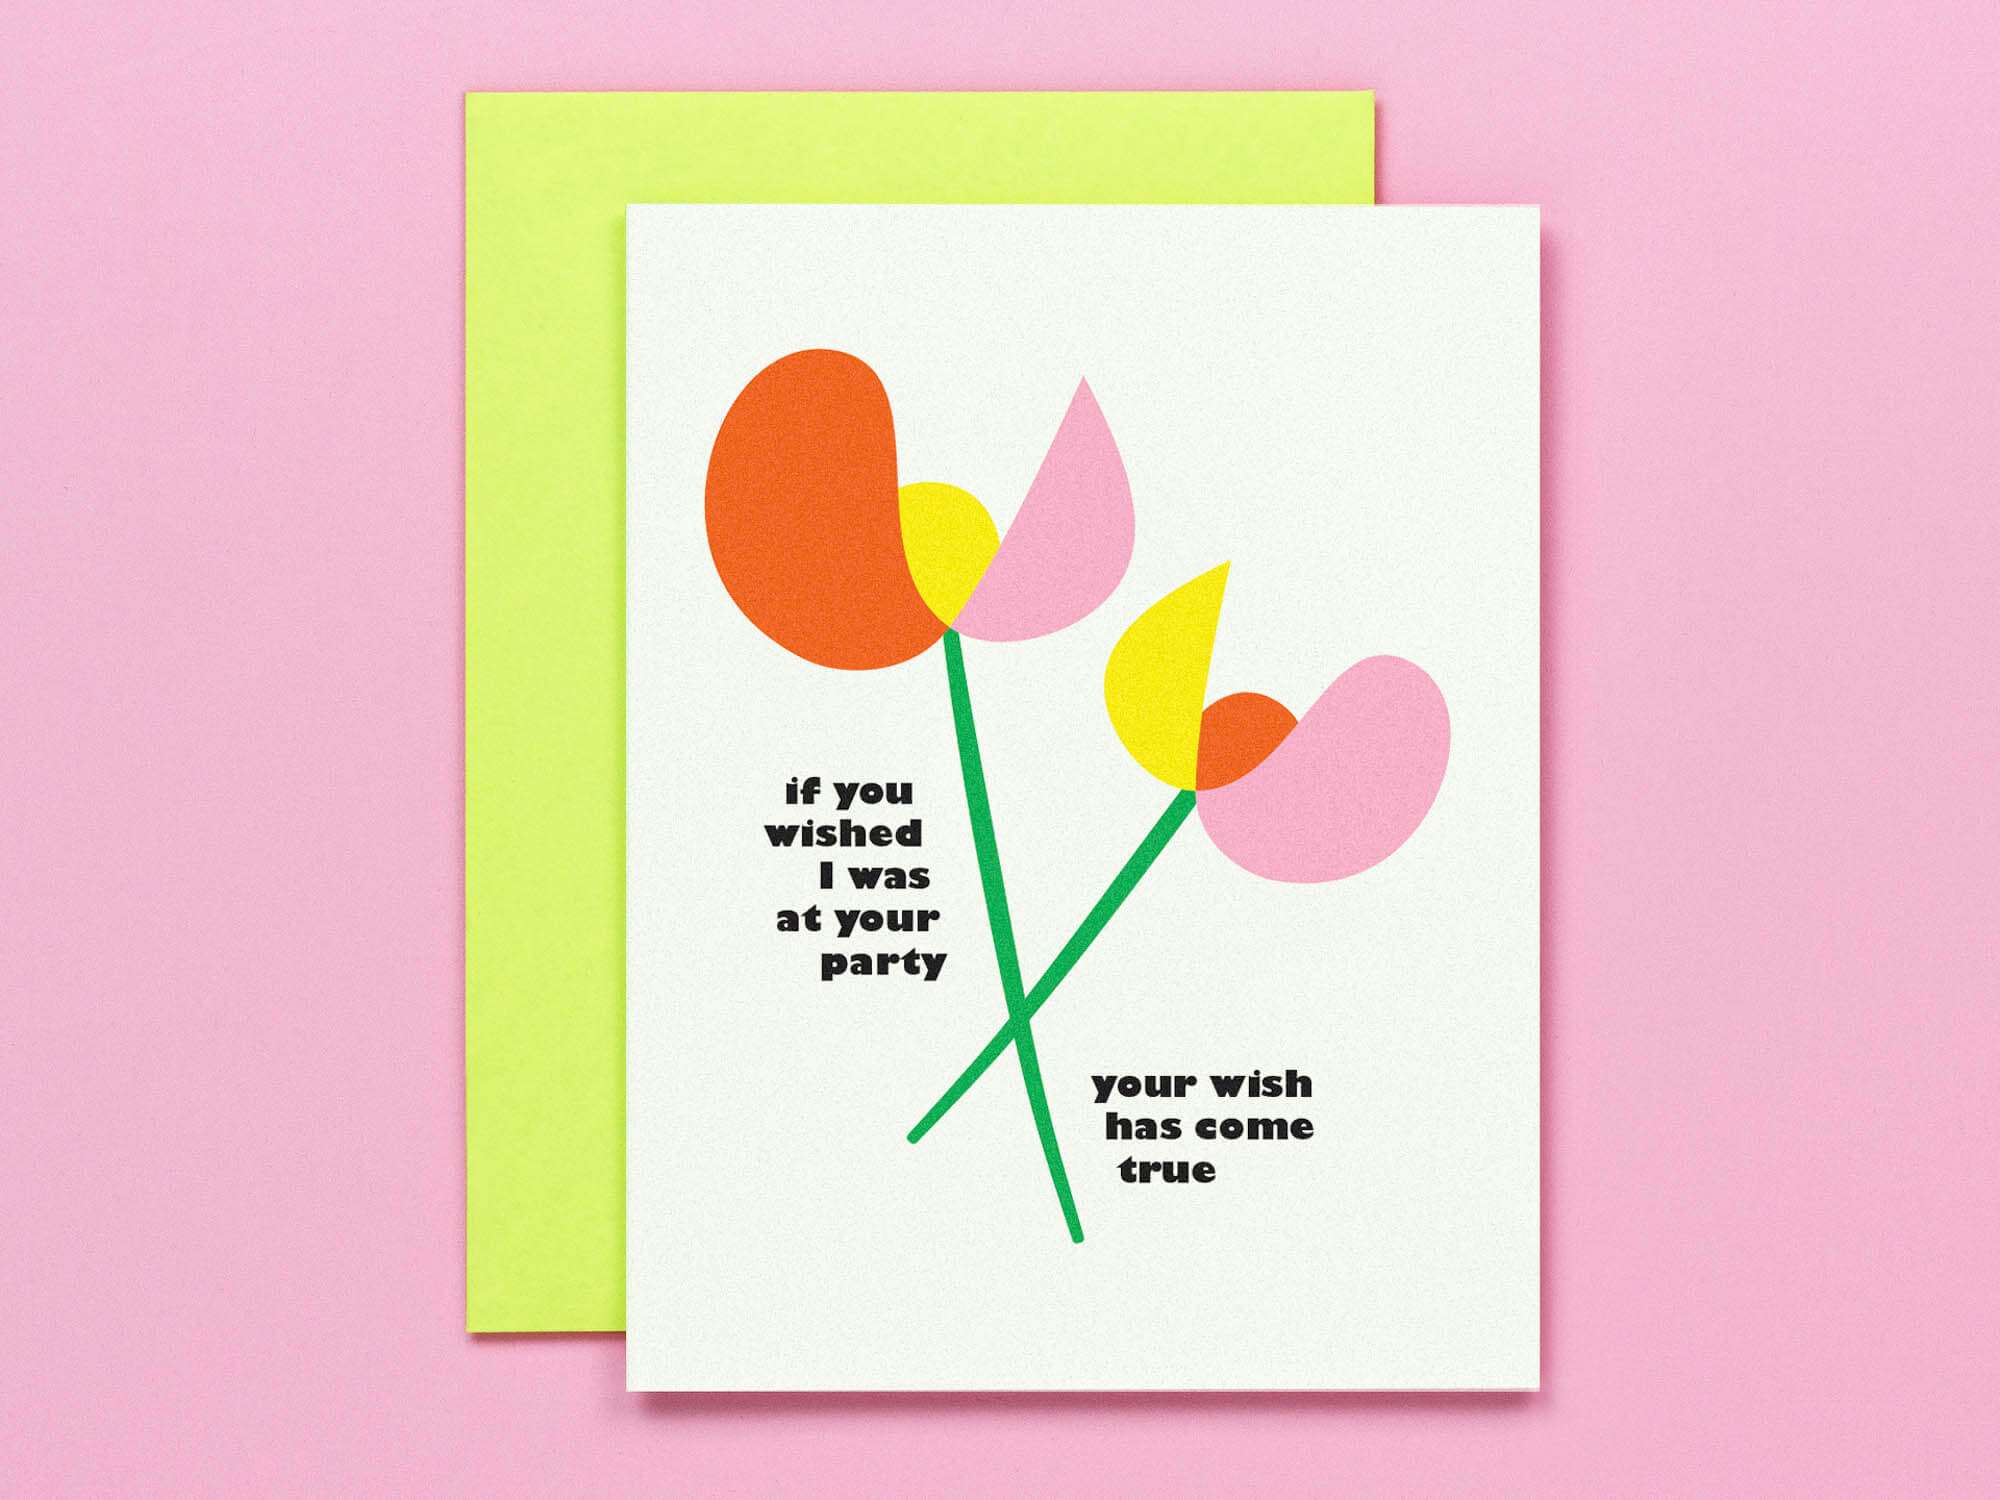 "If you wished I was at your party your wish has come true." Funny floral birthday card or housewarming card with mid-century inspired tulip flower illustration. Made in USA by My Darlin' @mydarlin_bk